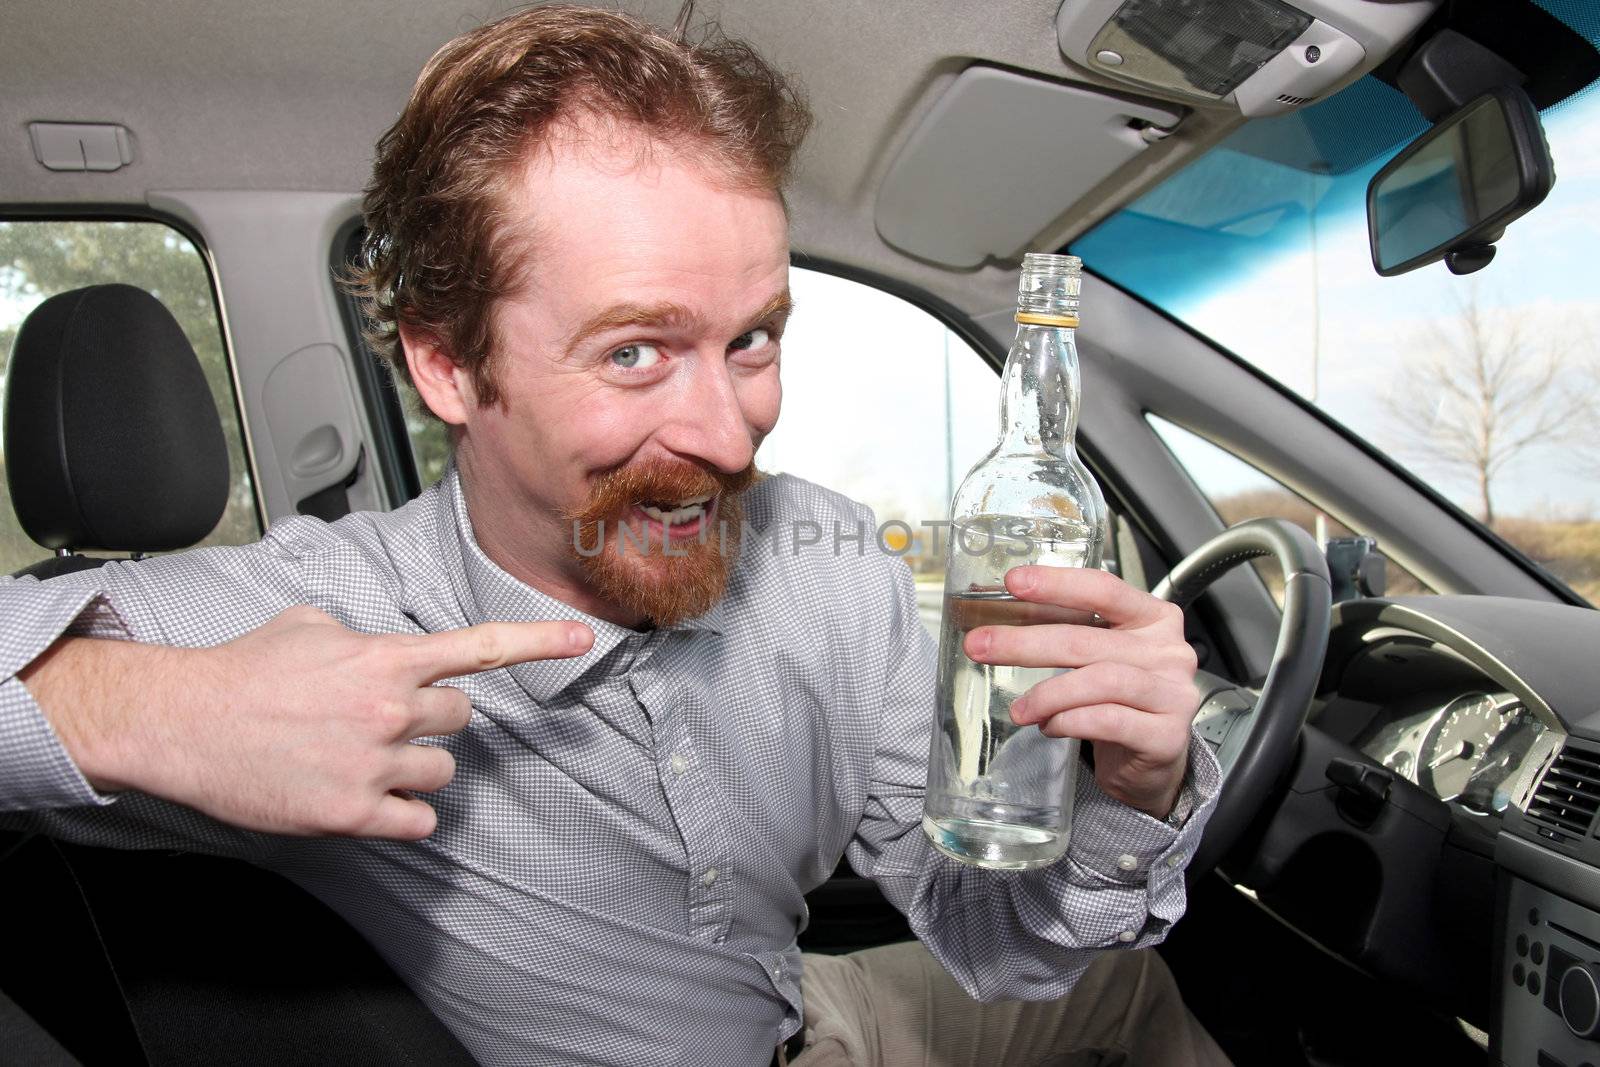 driver and alcohol by vladacanon